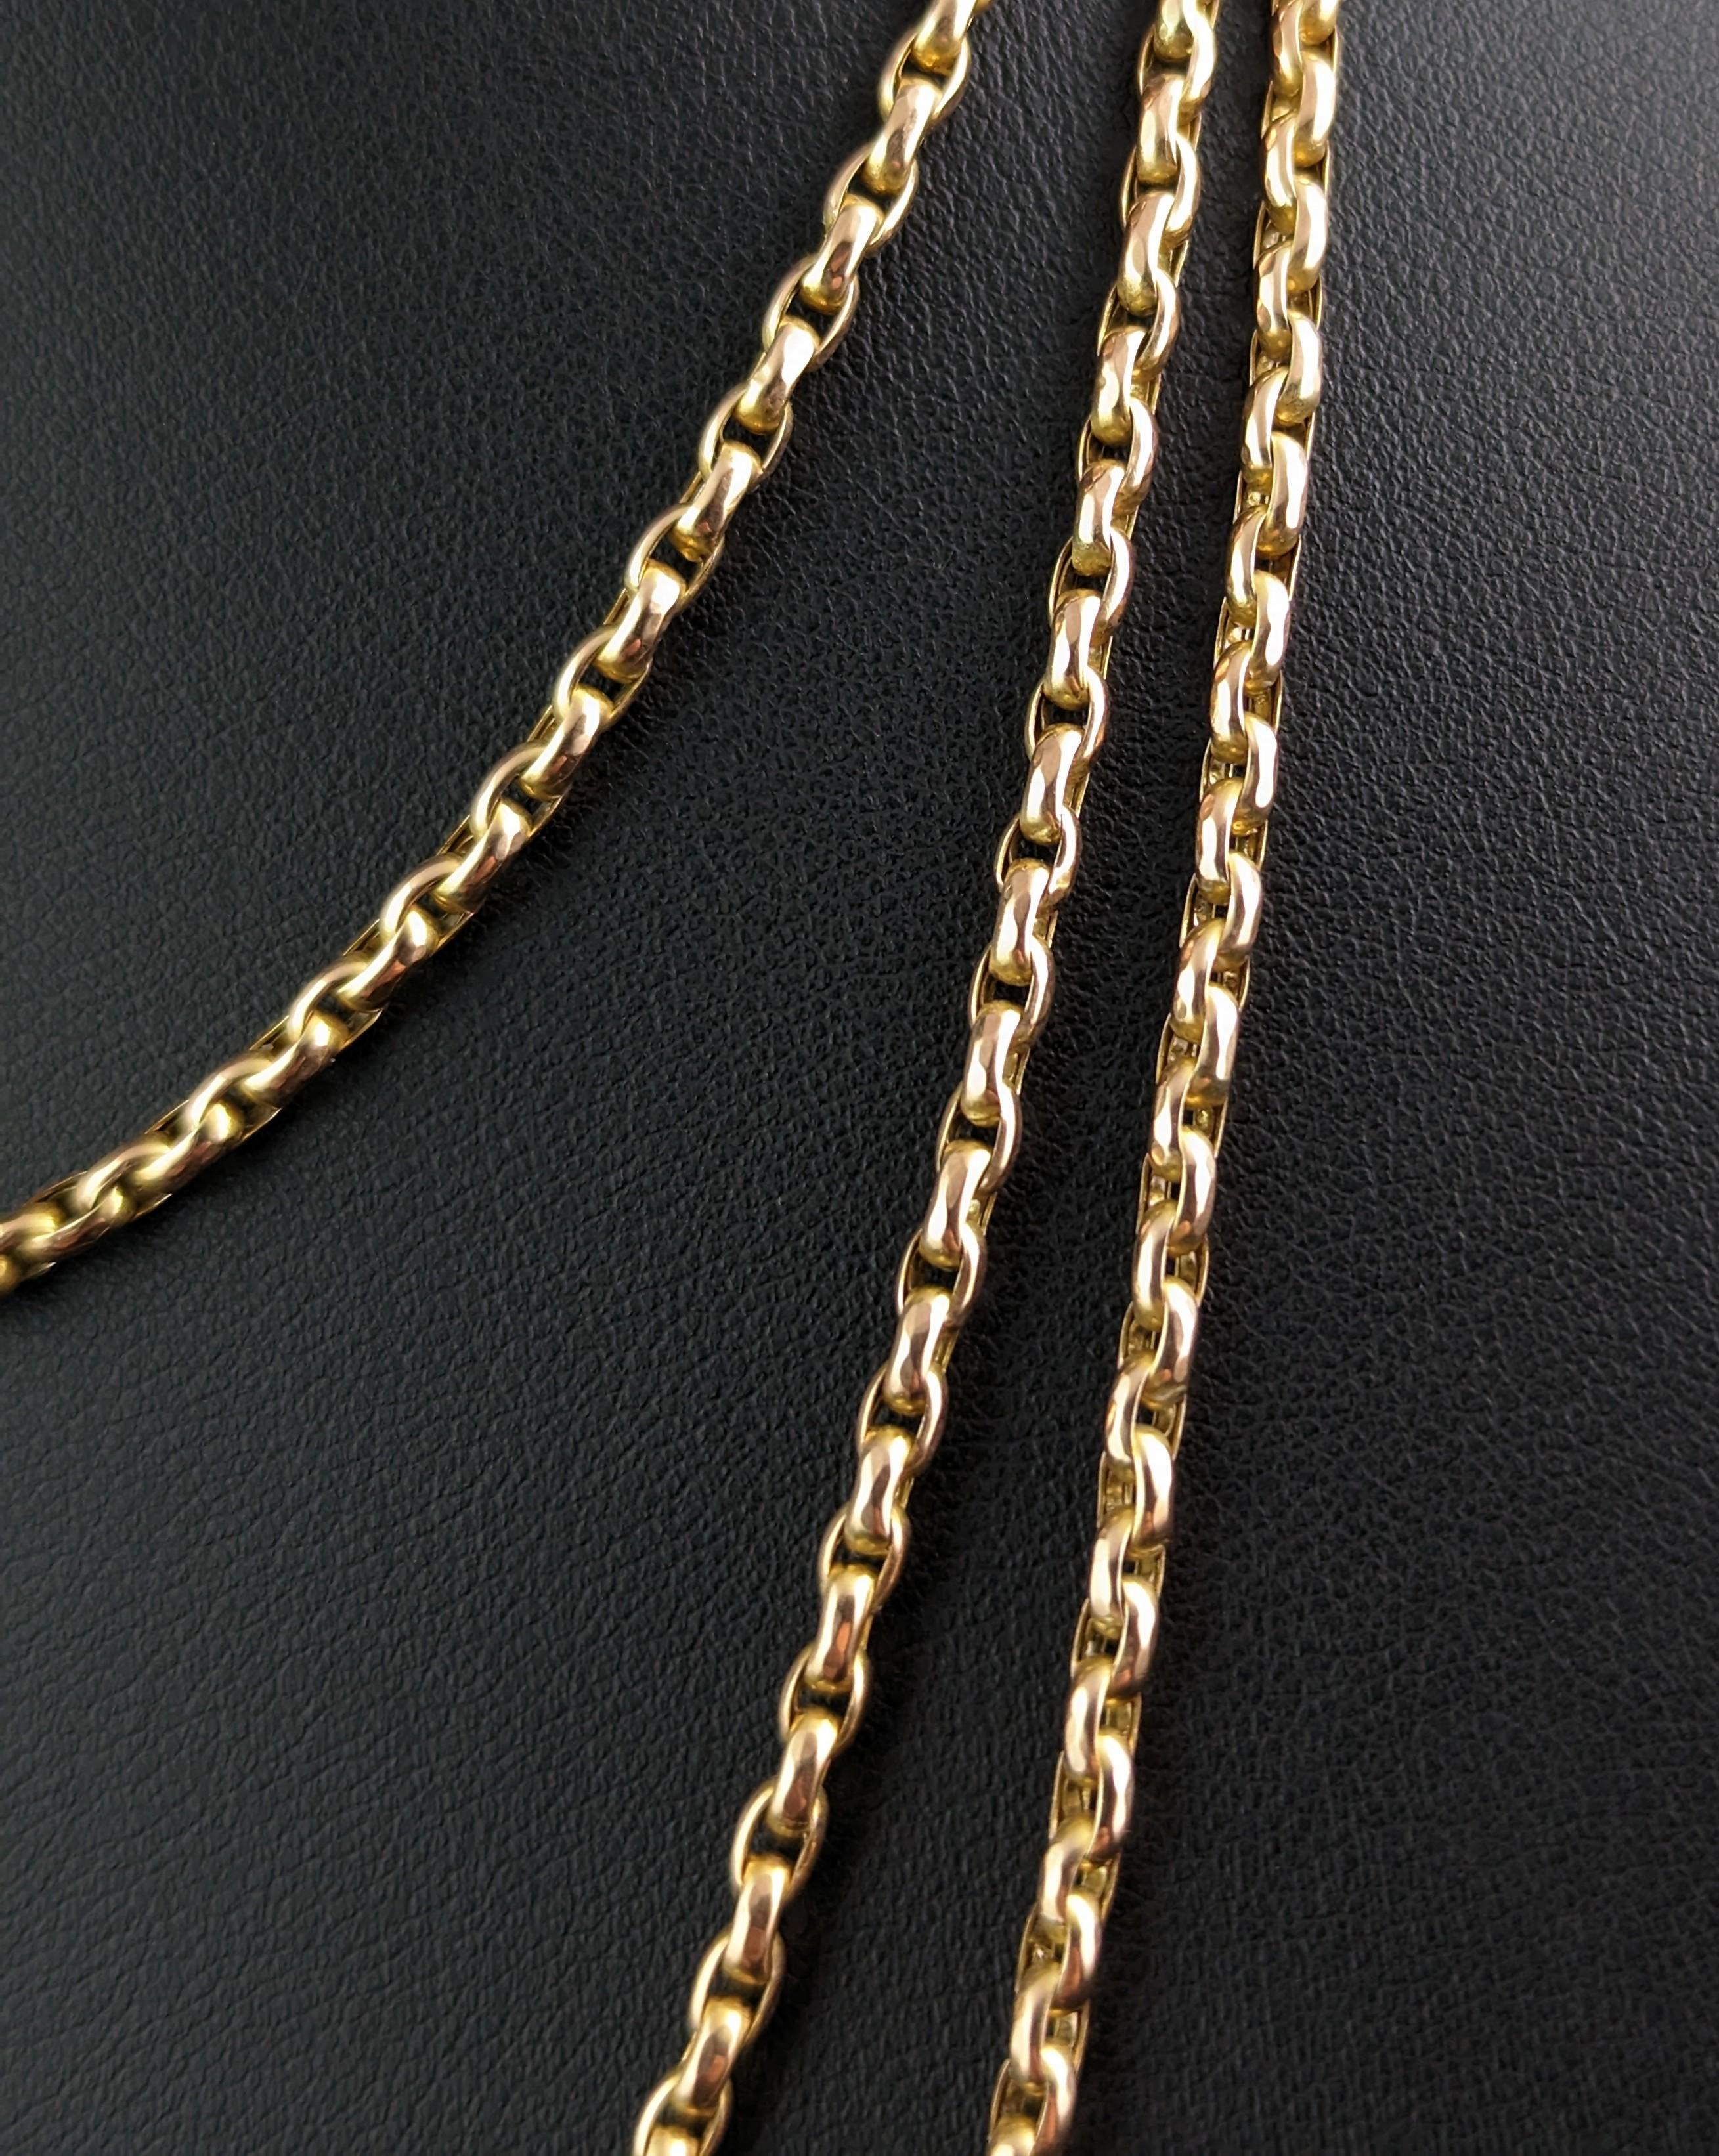 Antique 9k Yellow Gold Long Chain Necklace, Longuard, Victorian For Sale 2